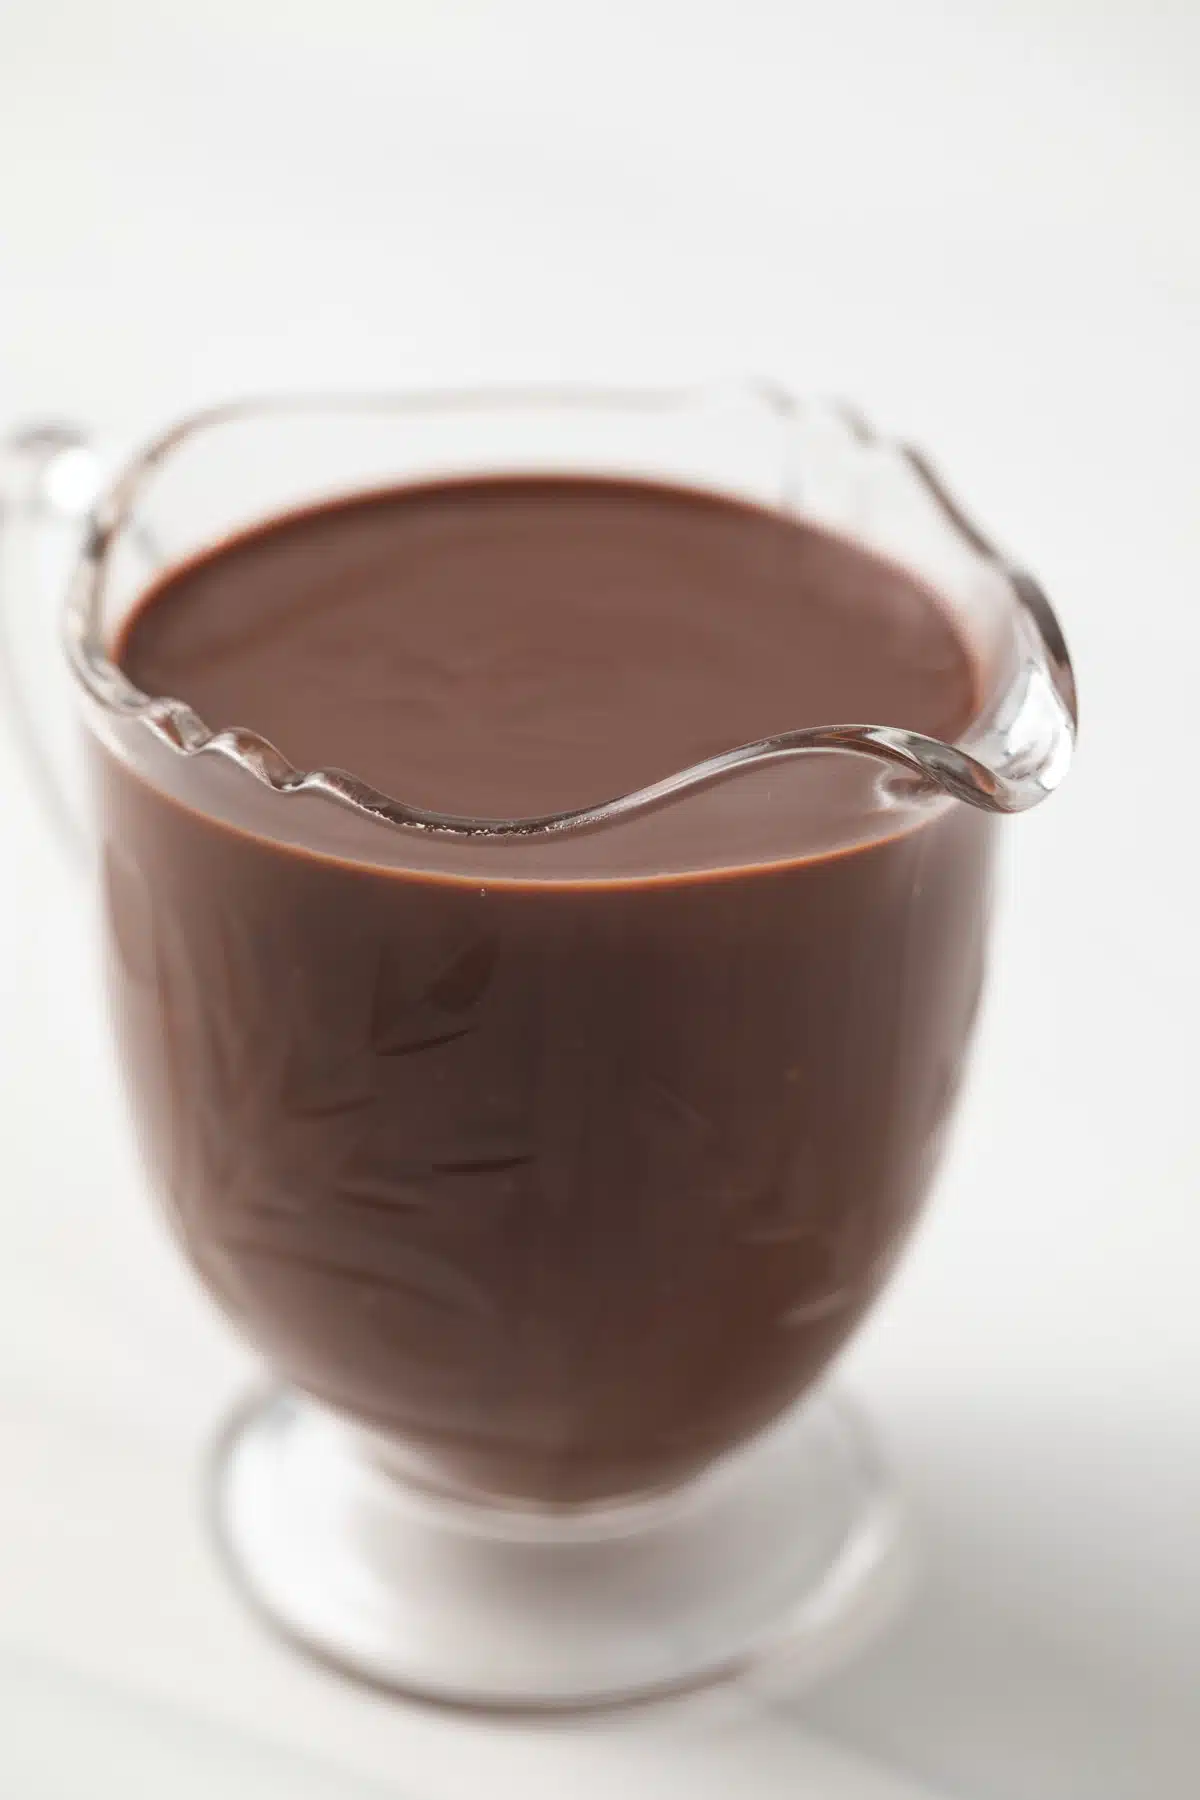 Chocolate sauce in small glass pitcher.